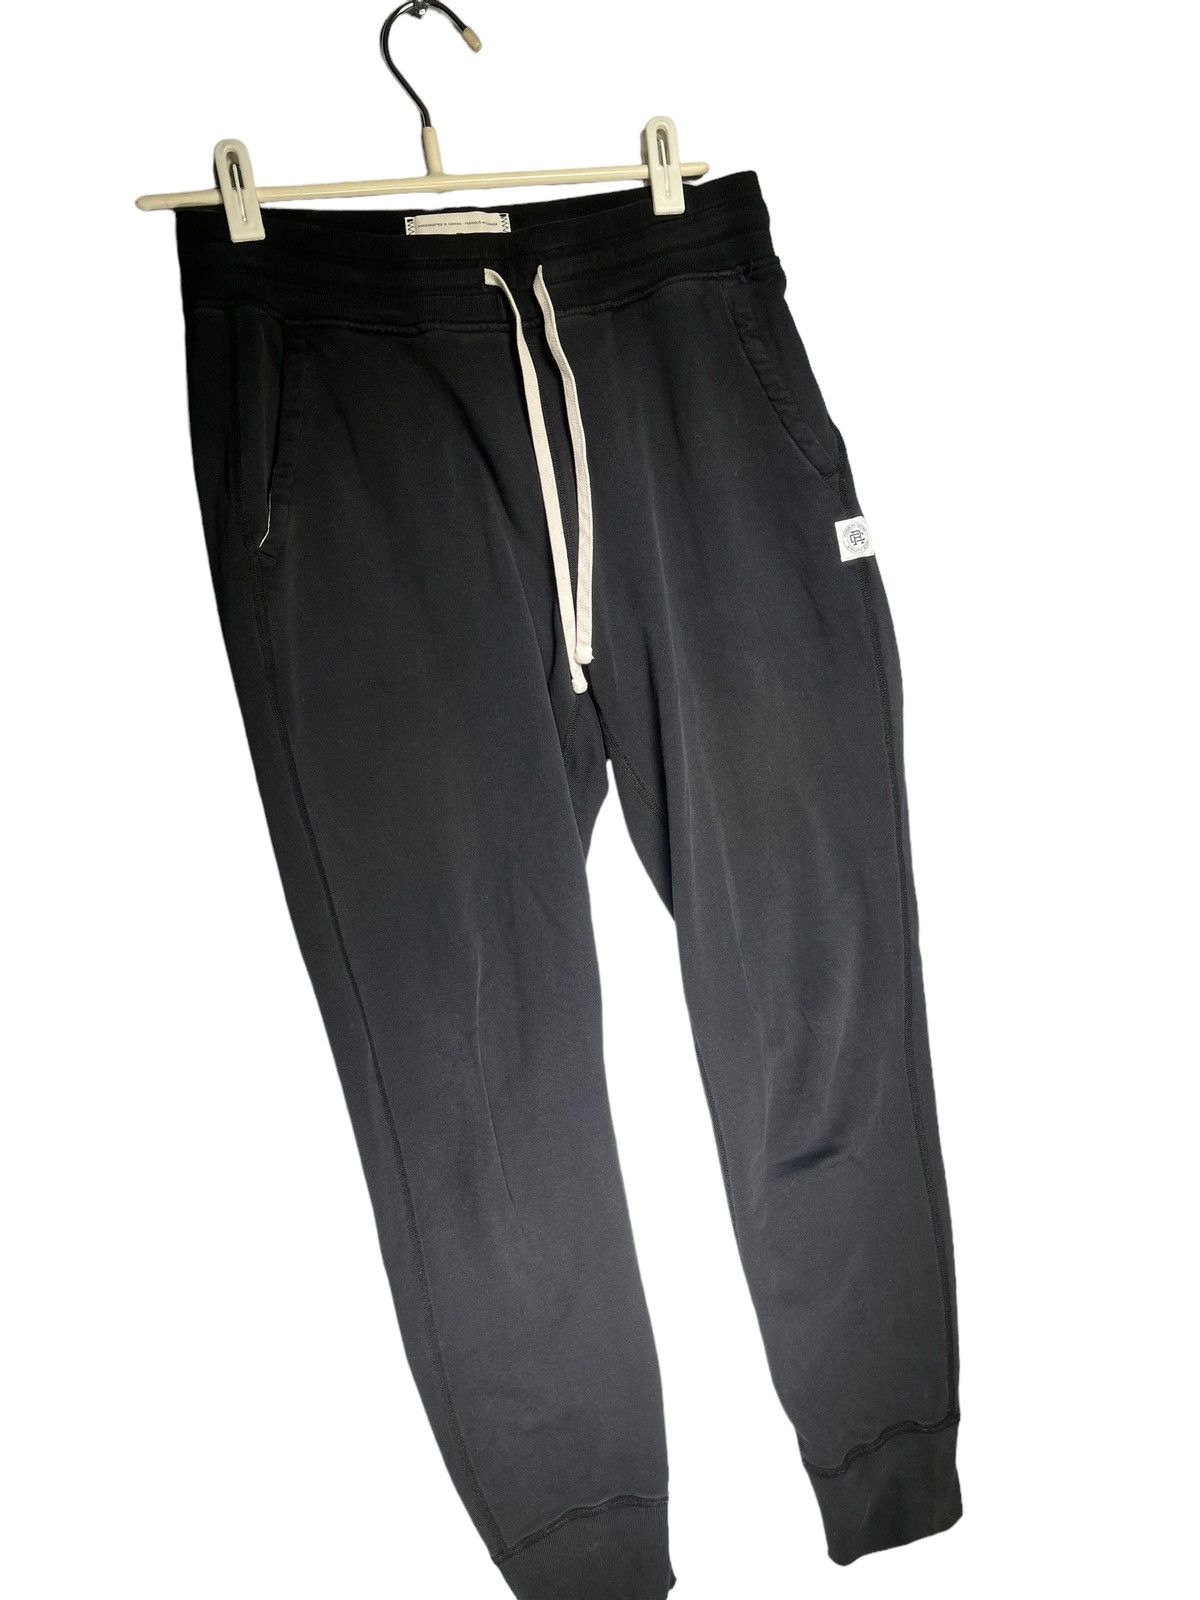 Reigning Champ Reigning Champ Sweat Pant | Grailed